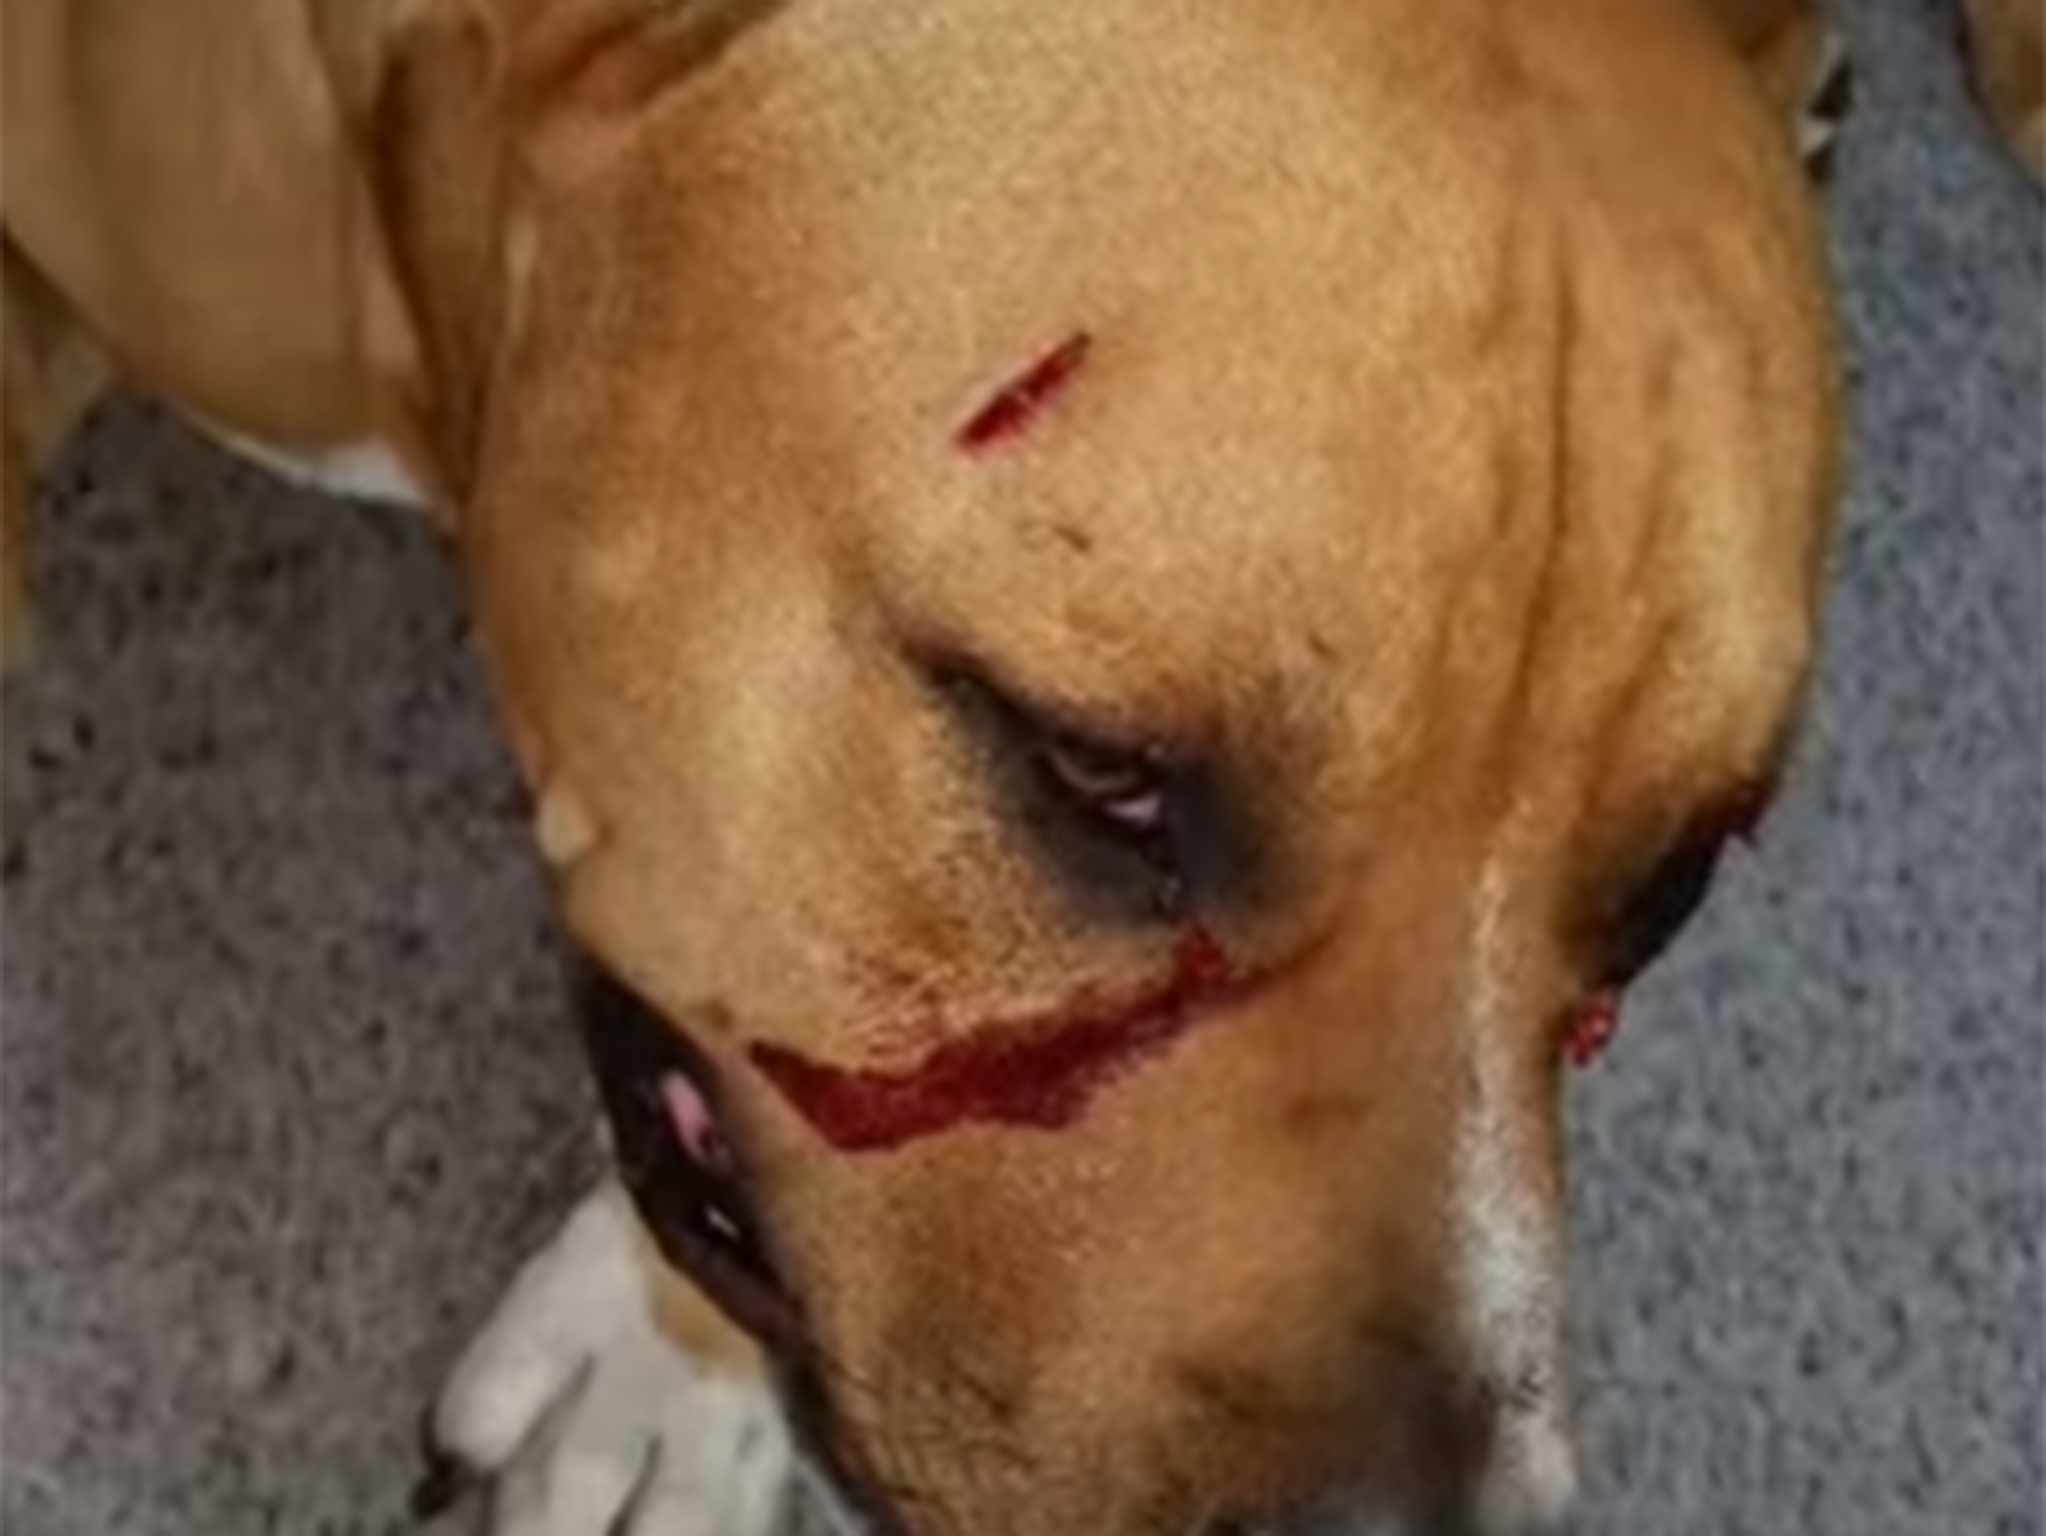 The dog's attack has been deemed so horrific, the full extent has not been shown